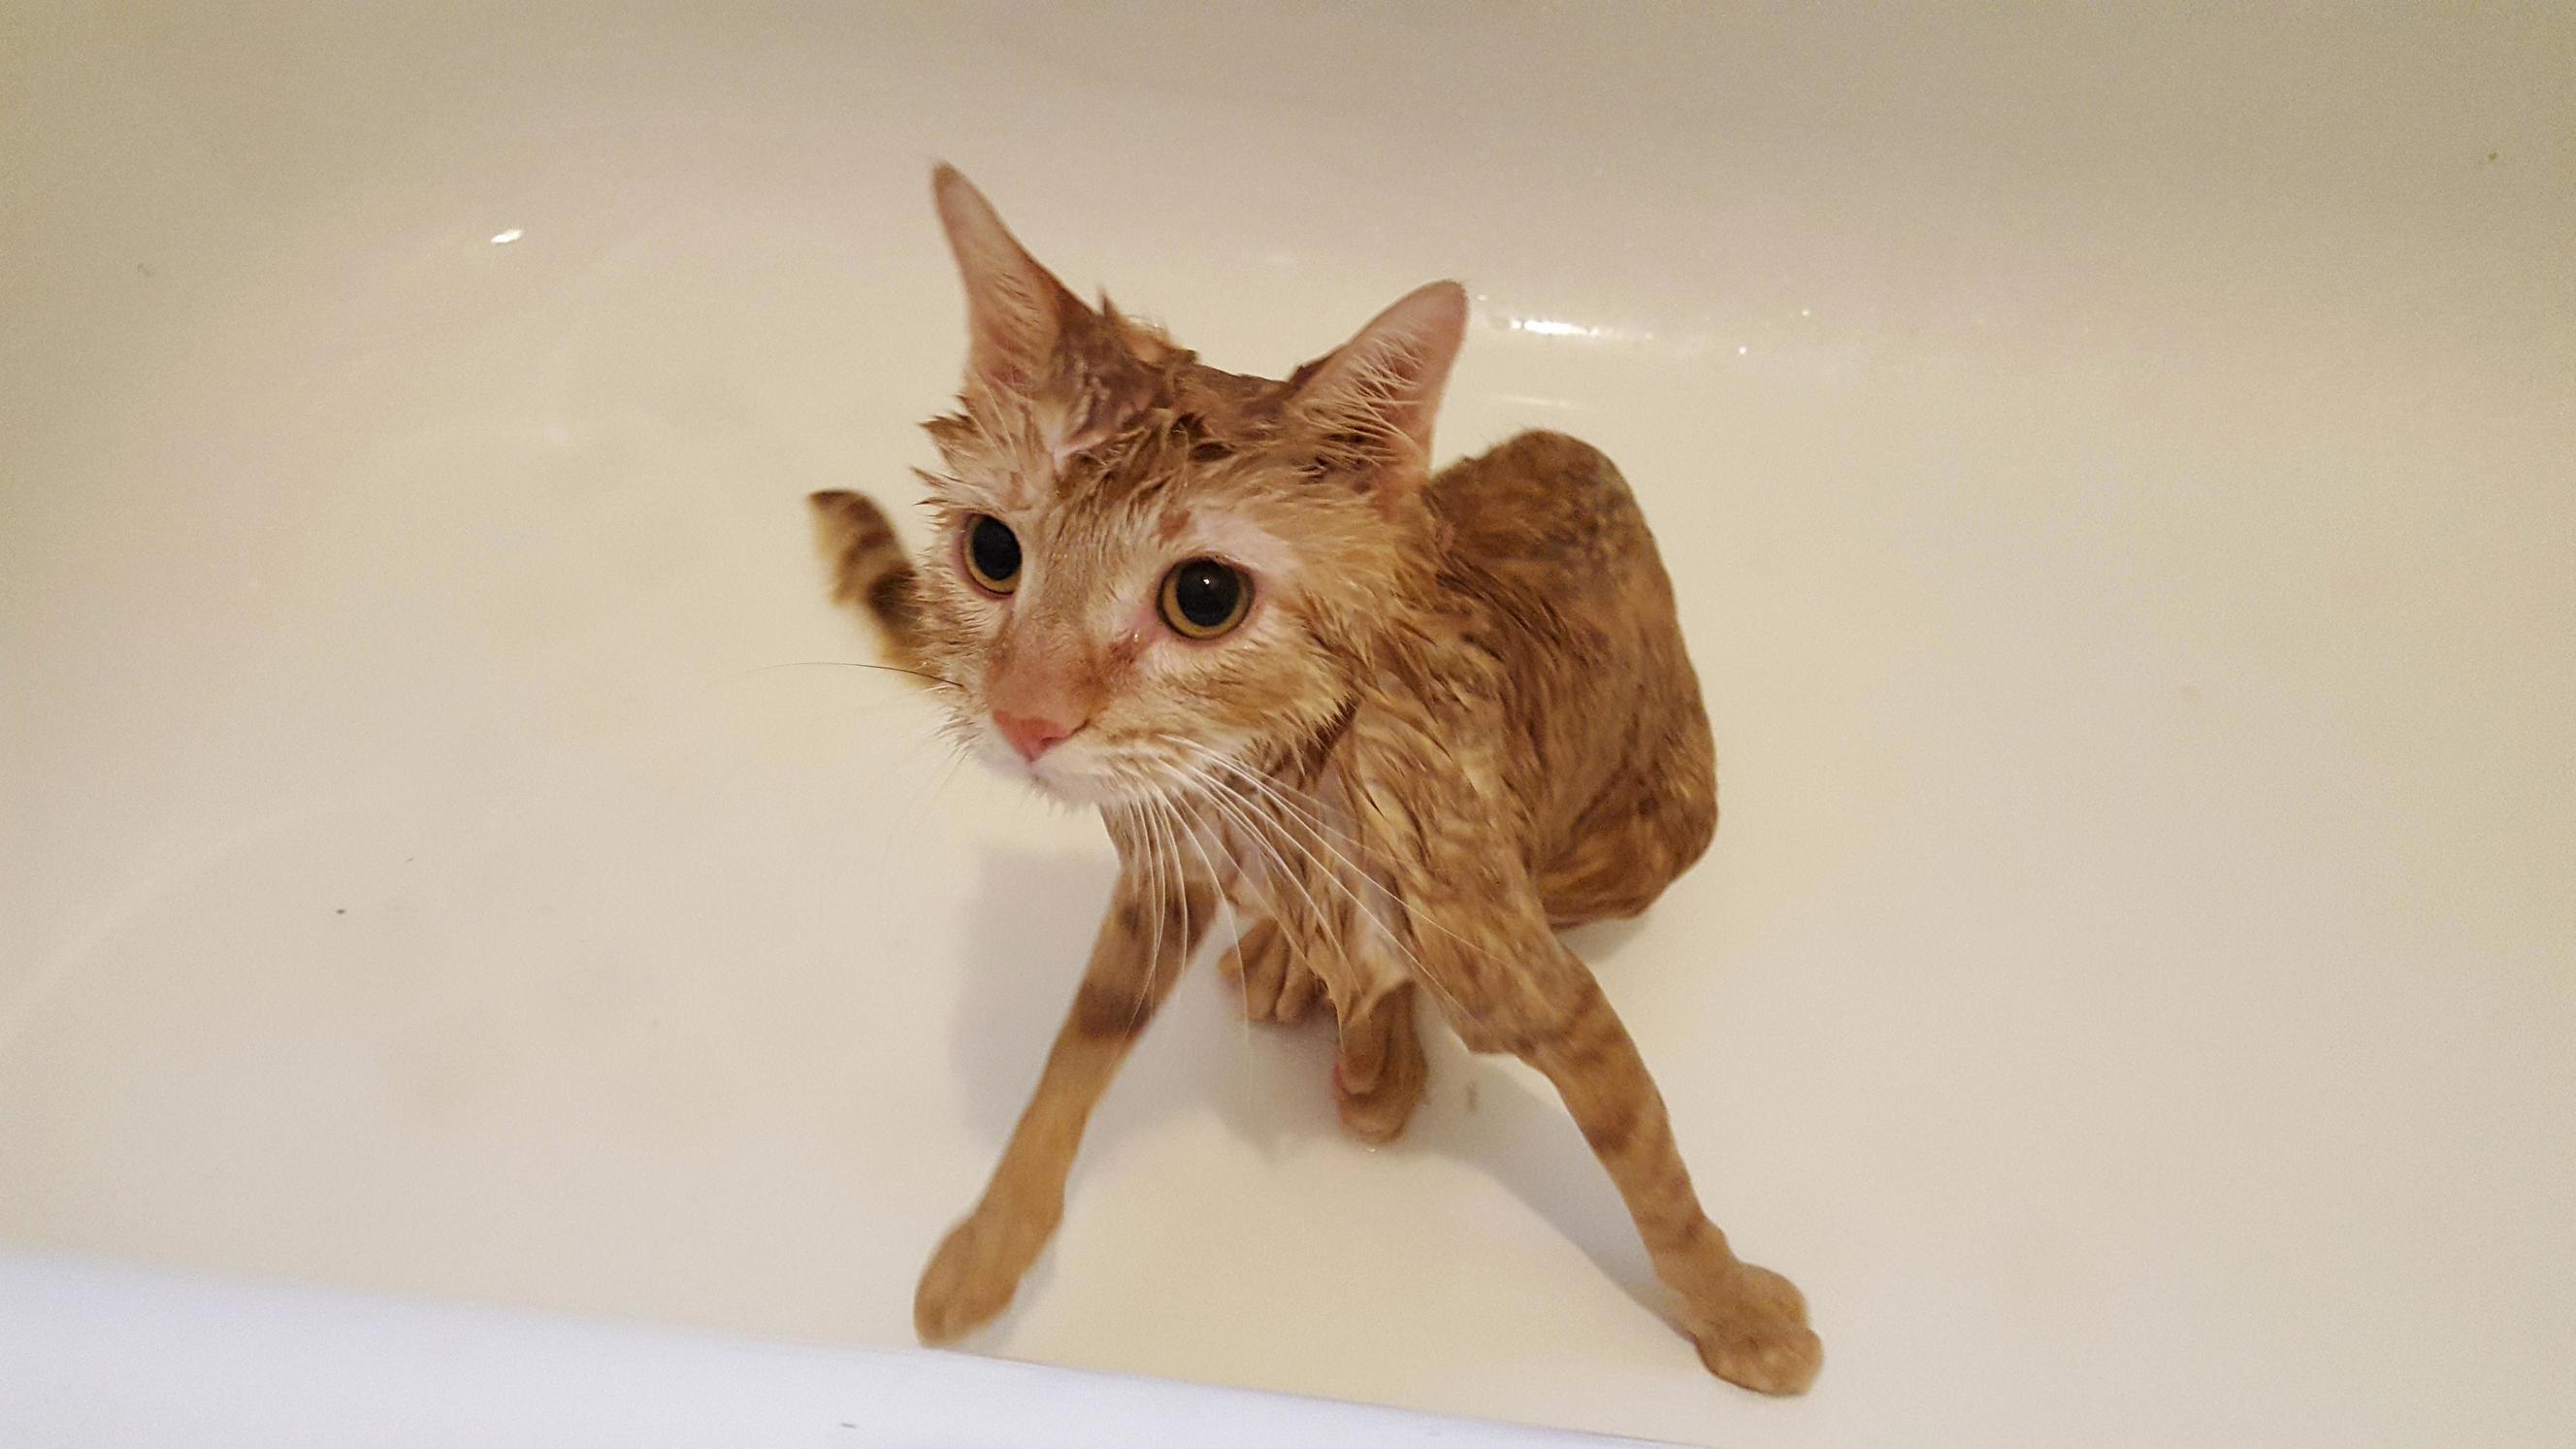 Rusty shackleford is blind and deaf so sometimes he needs extra help staying clean.